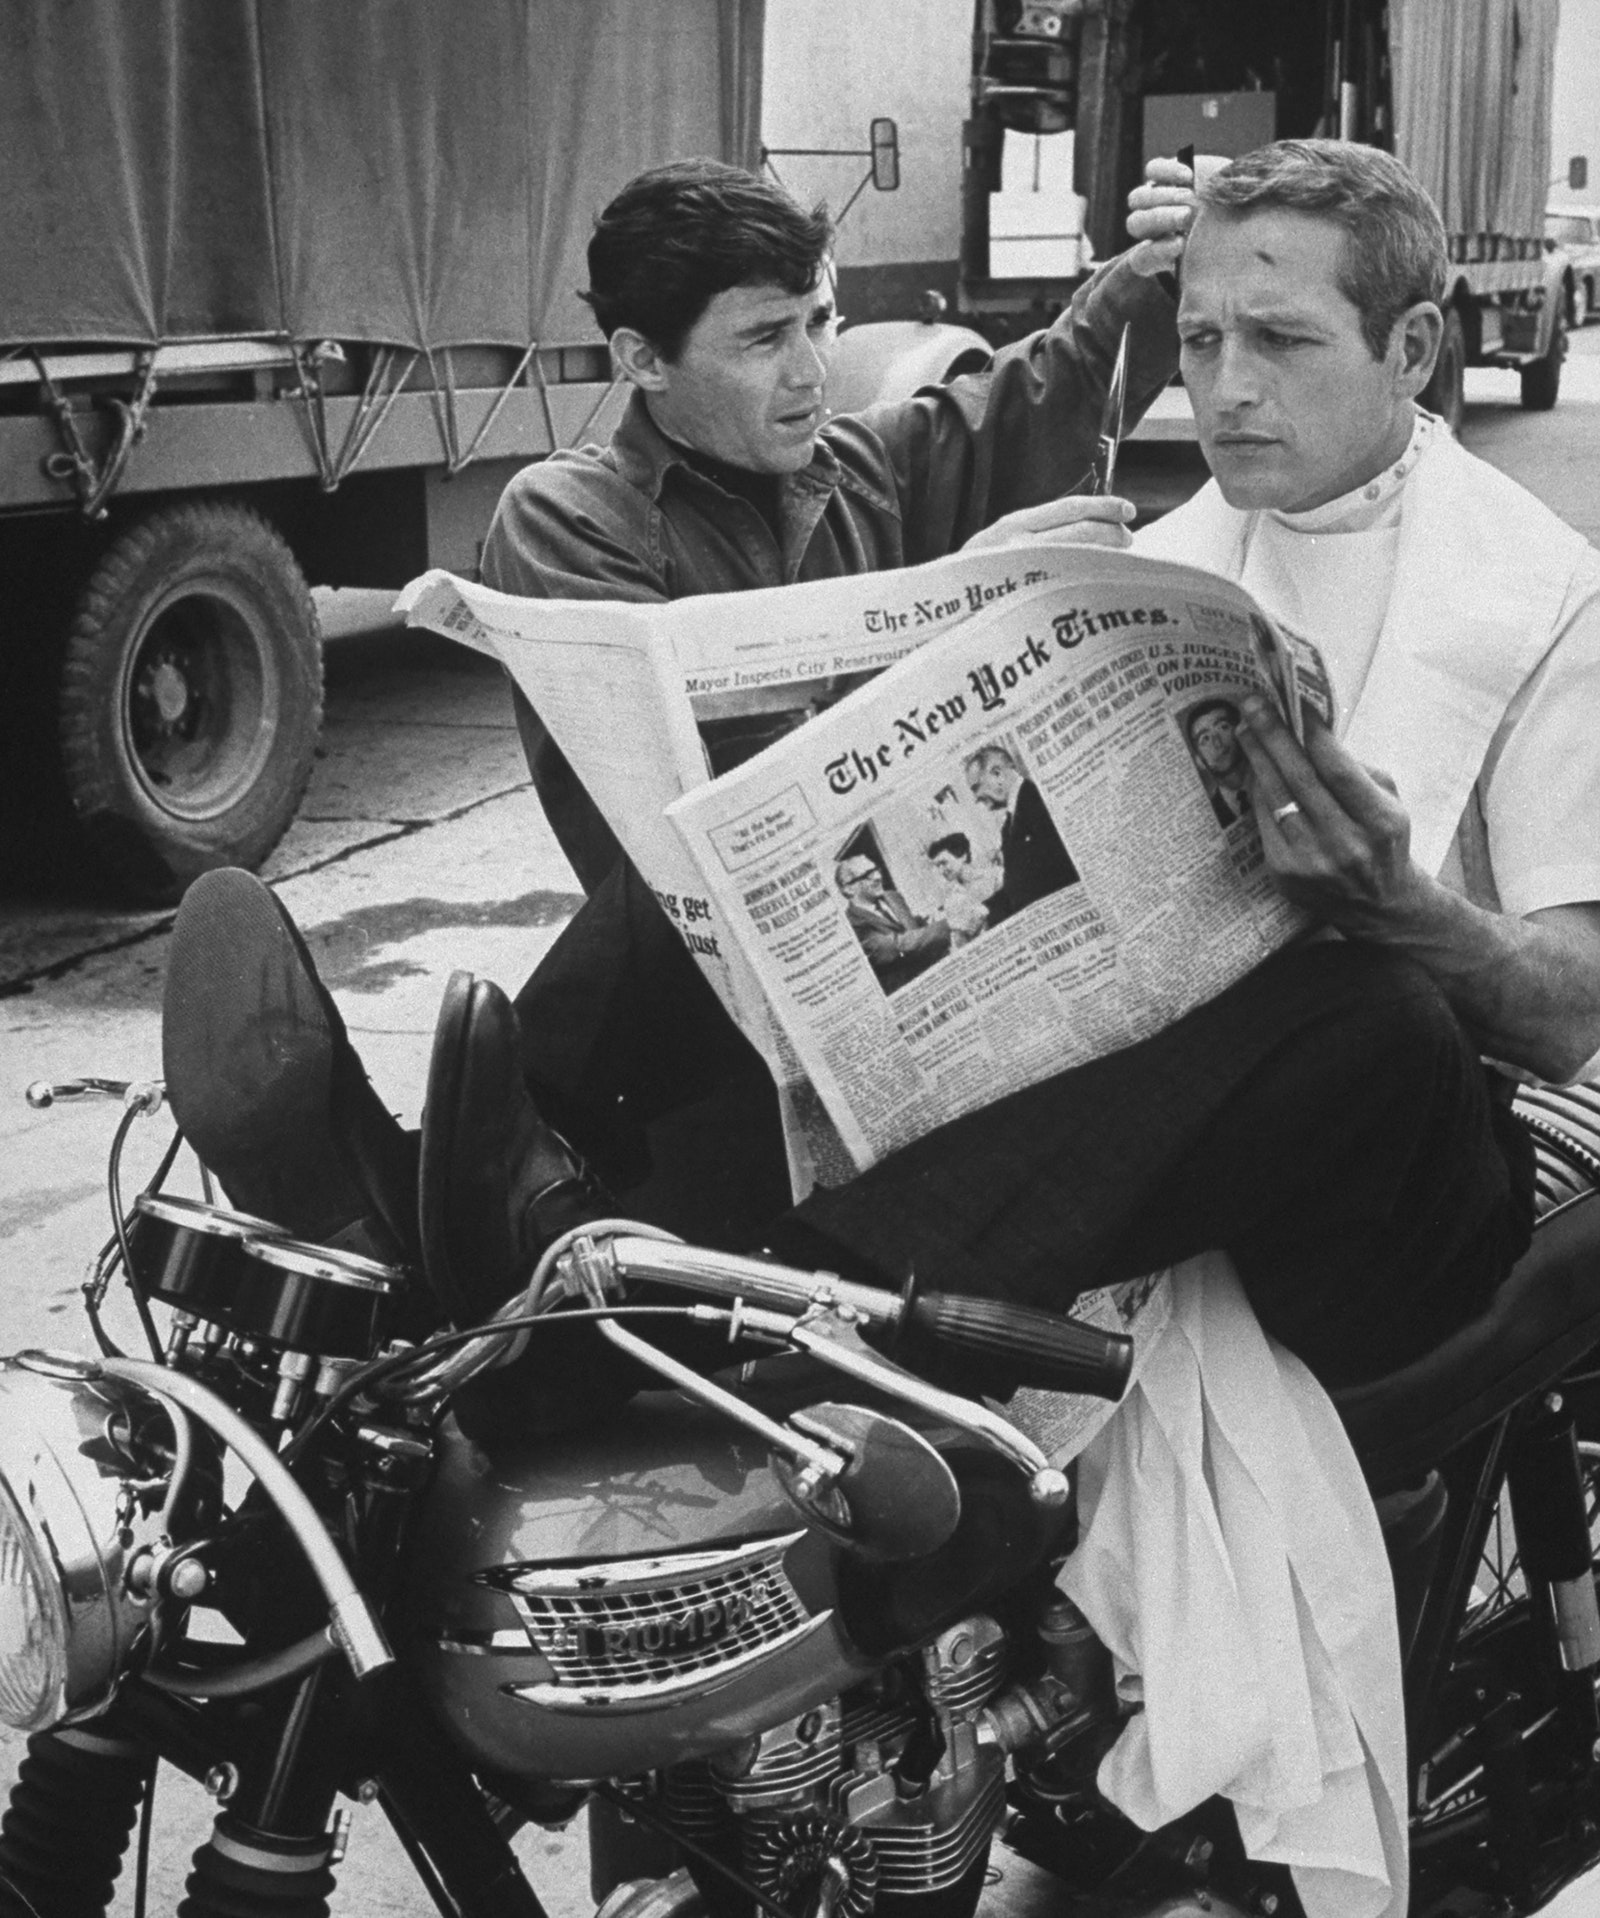 Image may contain Paul Newman Vehicle Transportation Motorcycle Human Person Wheel Machine Text and Newspaper